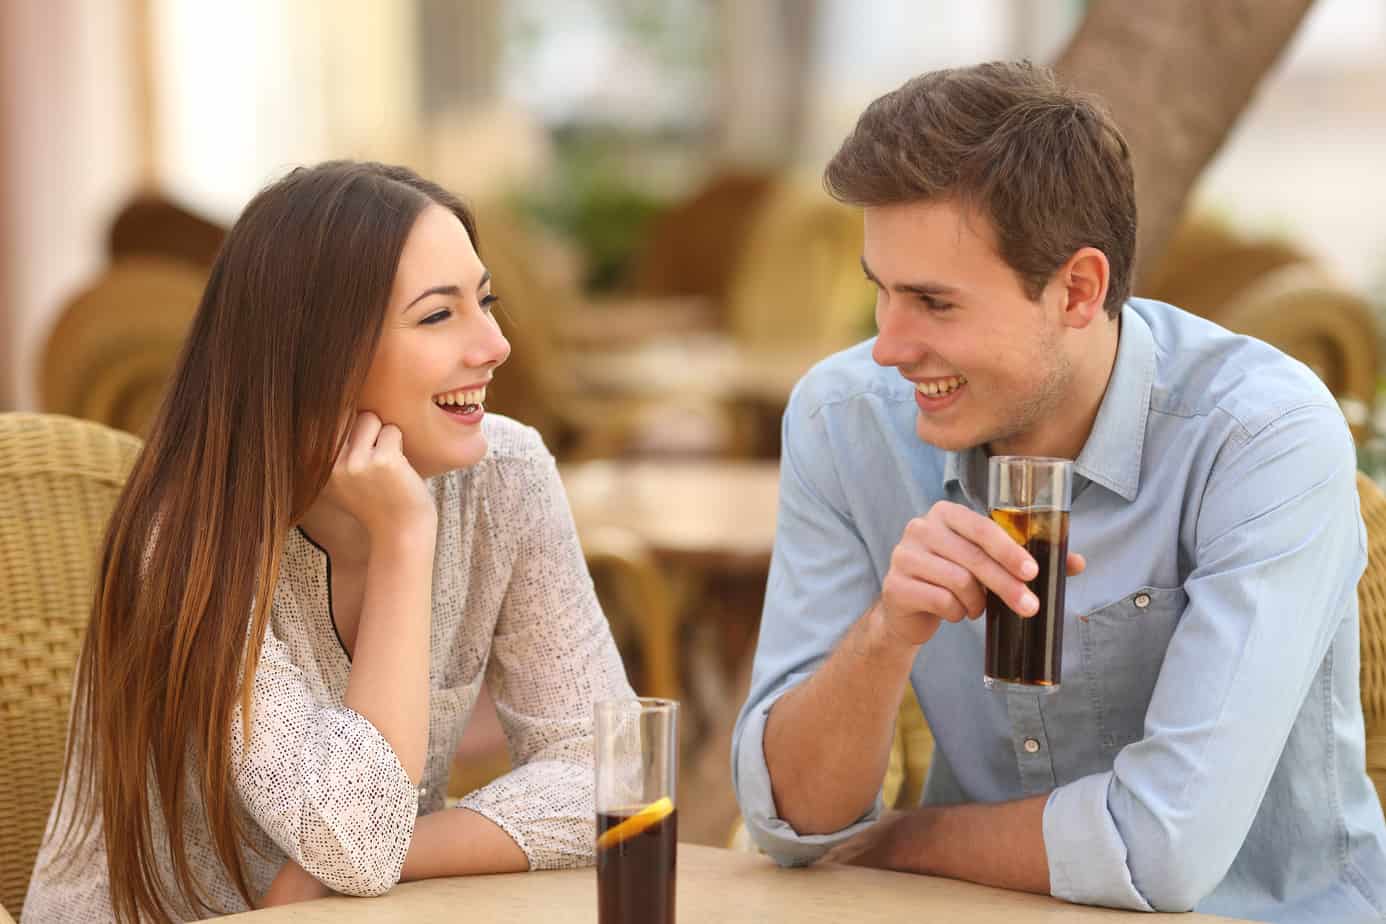 how to confirm a date without sounding desperate